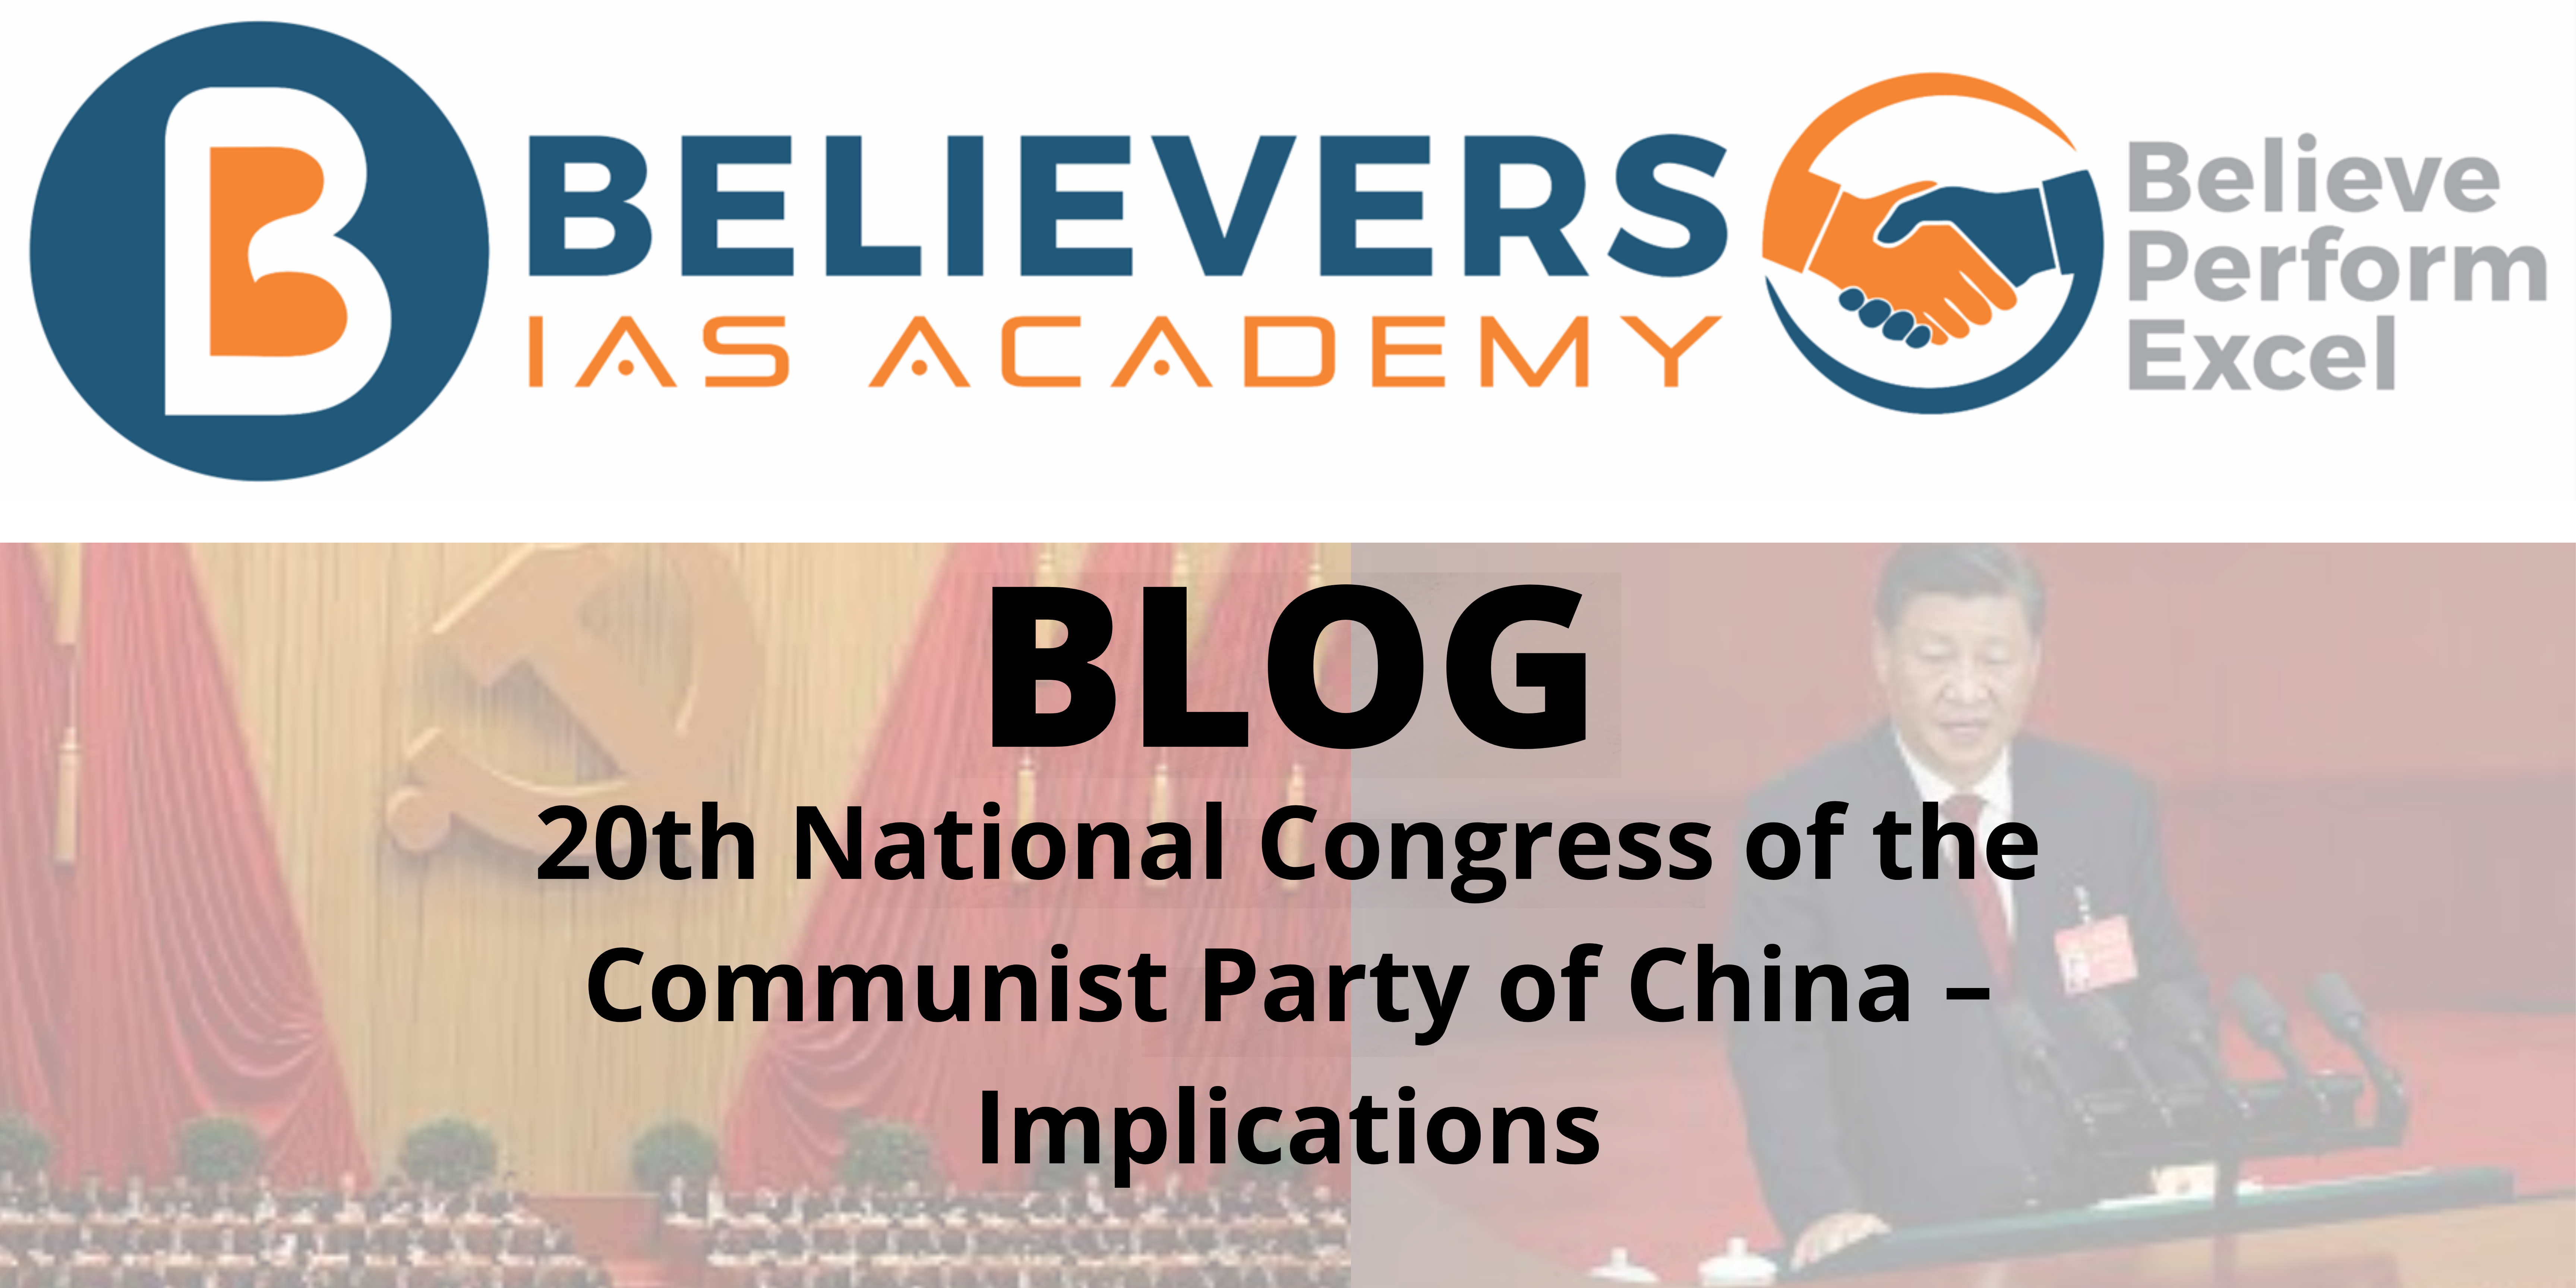 20th National Congress of the Communist Party of China - Implications